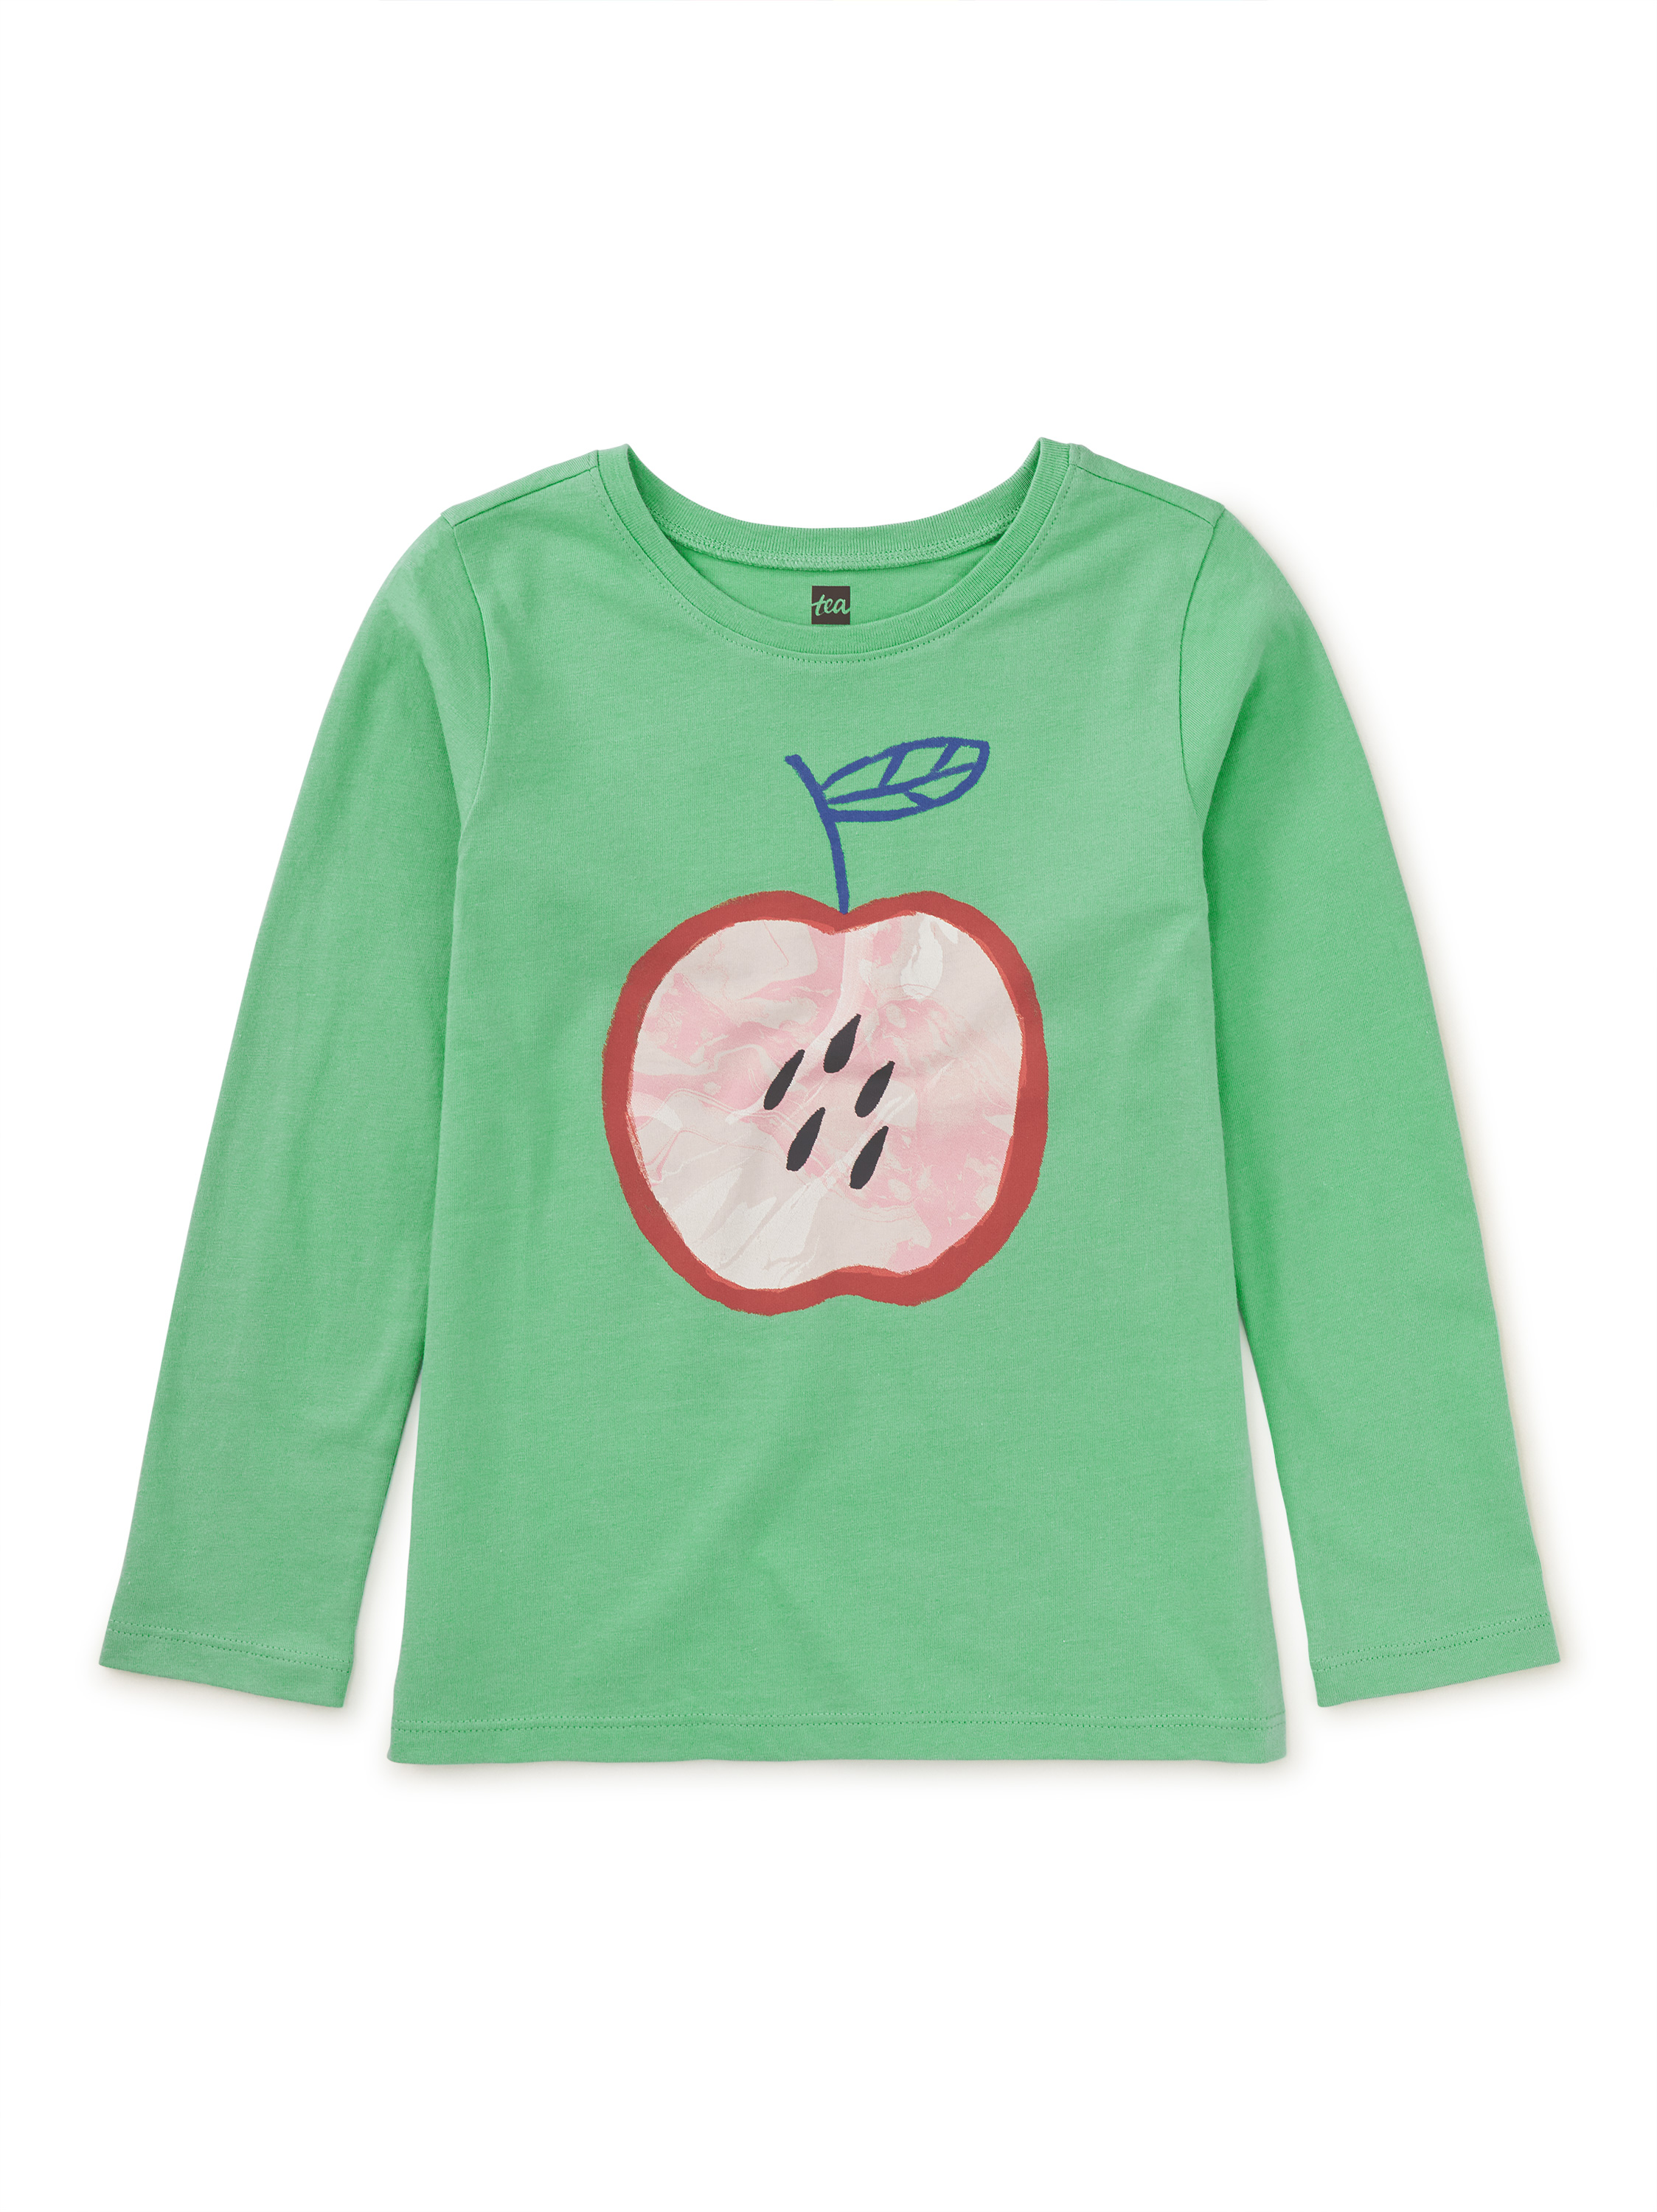 Marbled Apple Graphic Tee